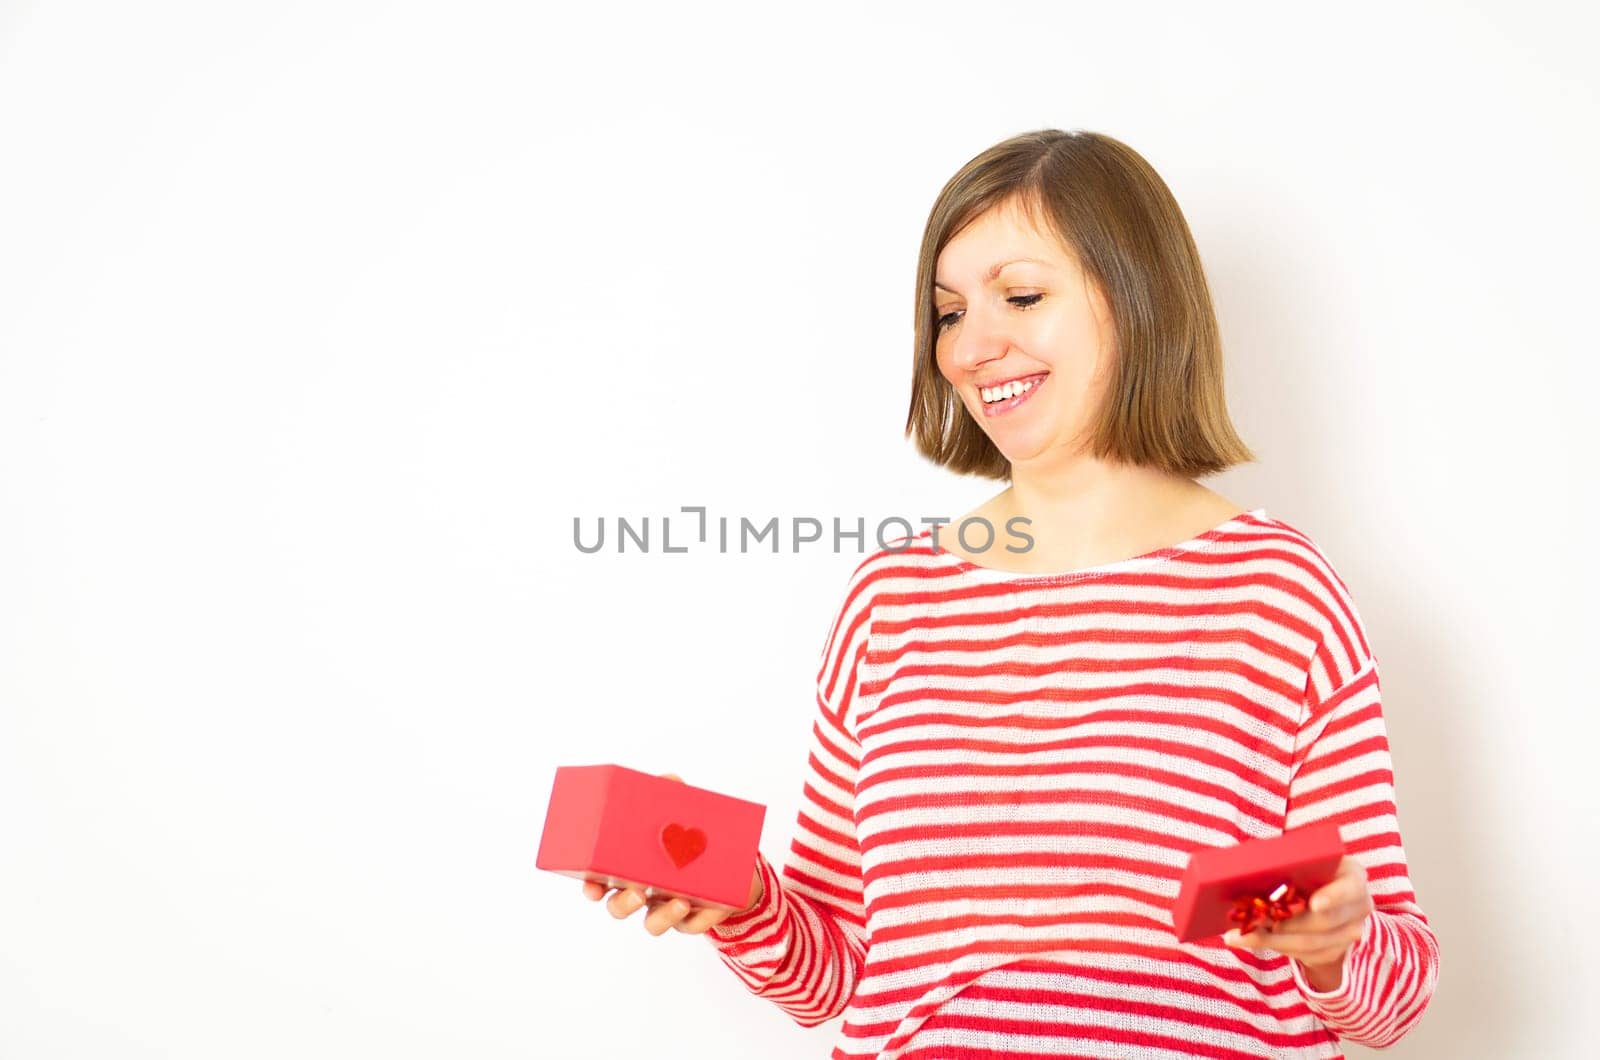 Happy smiling women in red and white shirt with a red gift box on the white background. Happy valentines day.